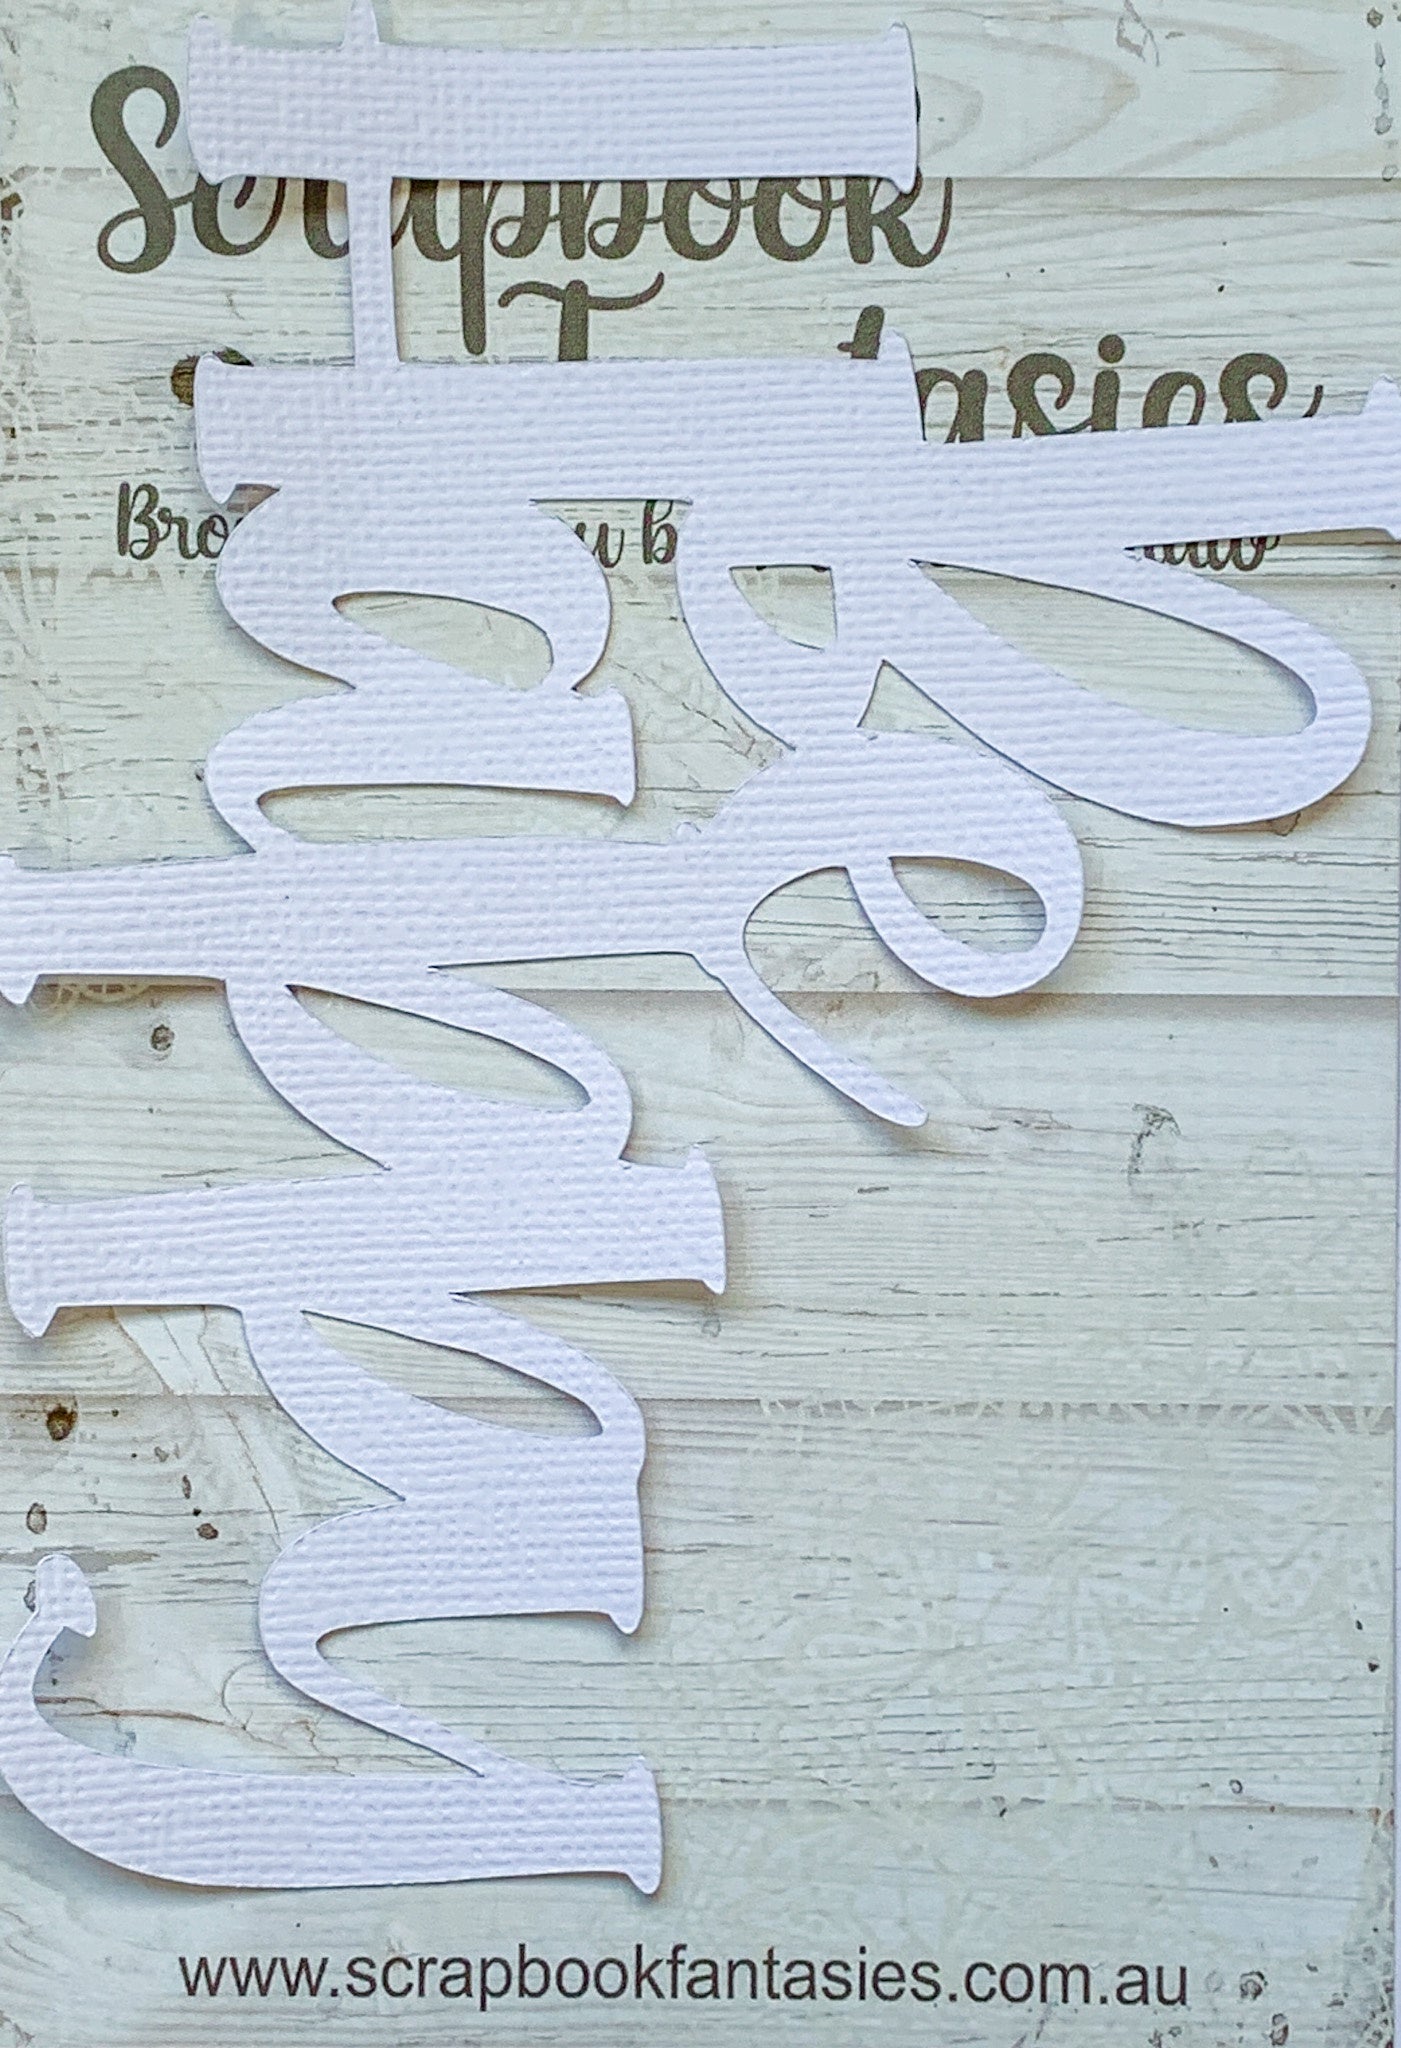 Be Happy 5"x3.75" White Linen Cardstock Title-Cut - Designed by Alicia Redshaw